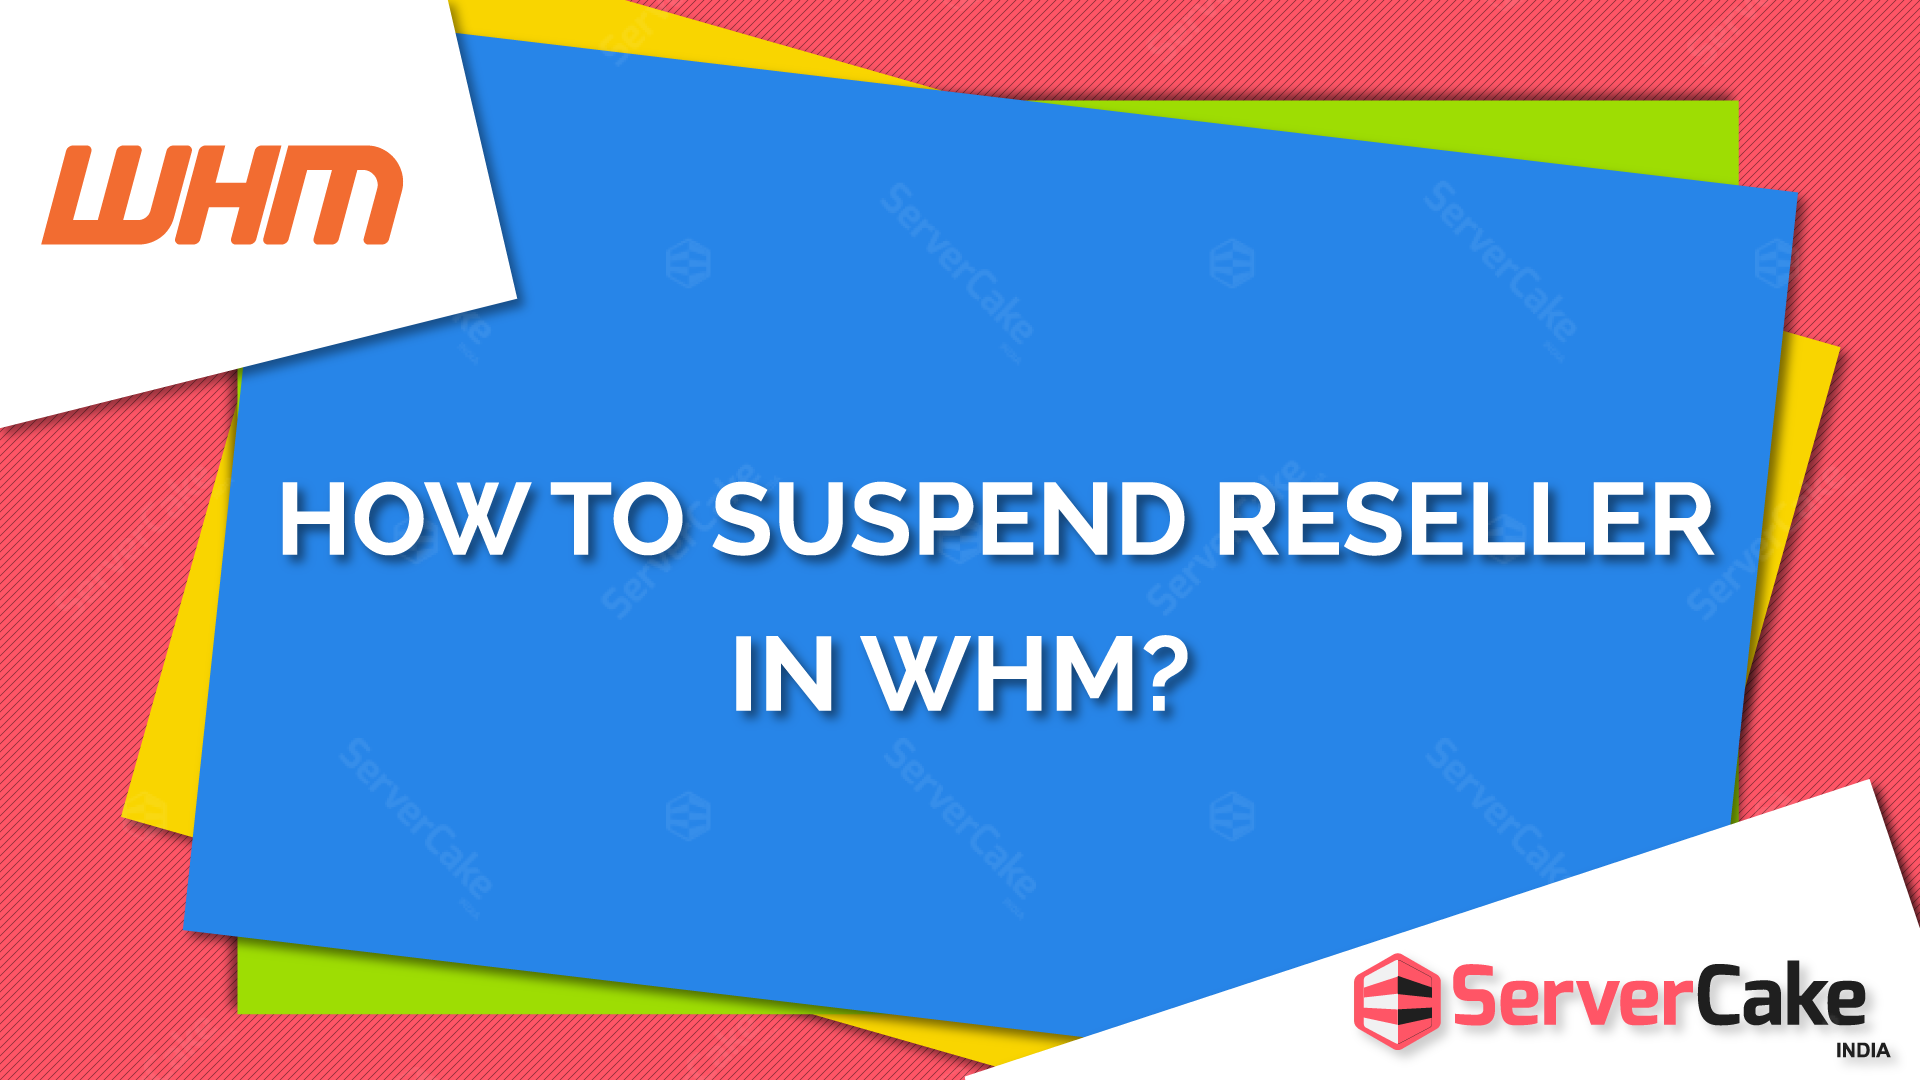 How to suspend Reseller in WHM?